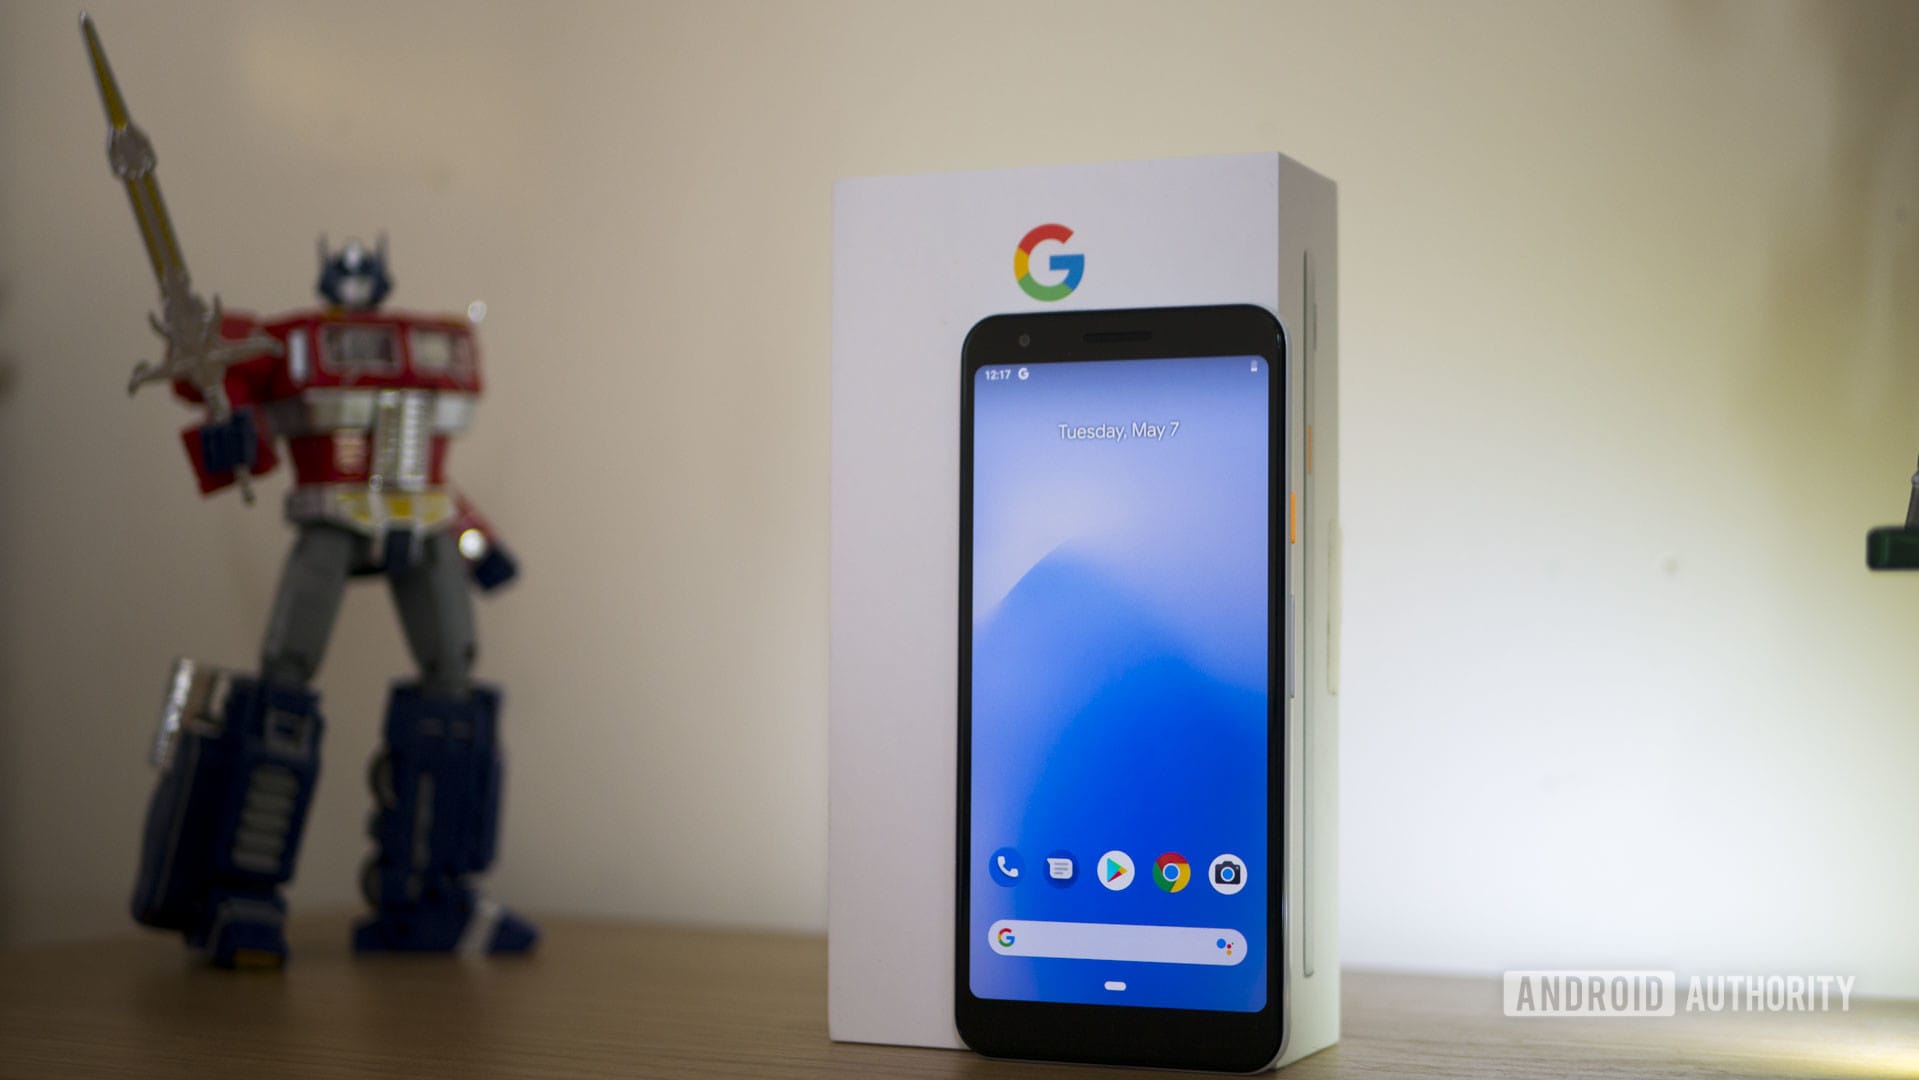 Pixel 3a handset standing on a table in front of its retail box. 